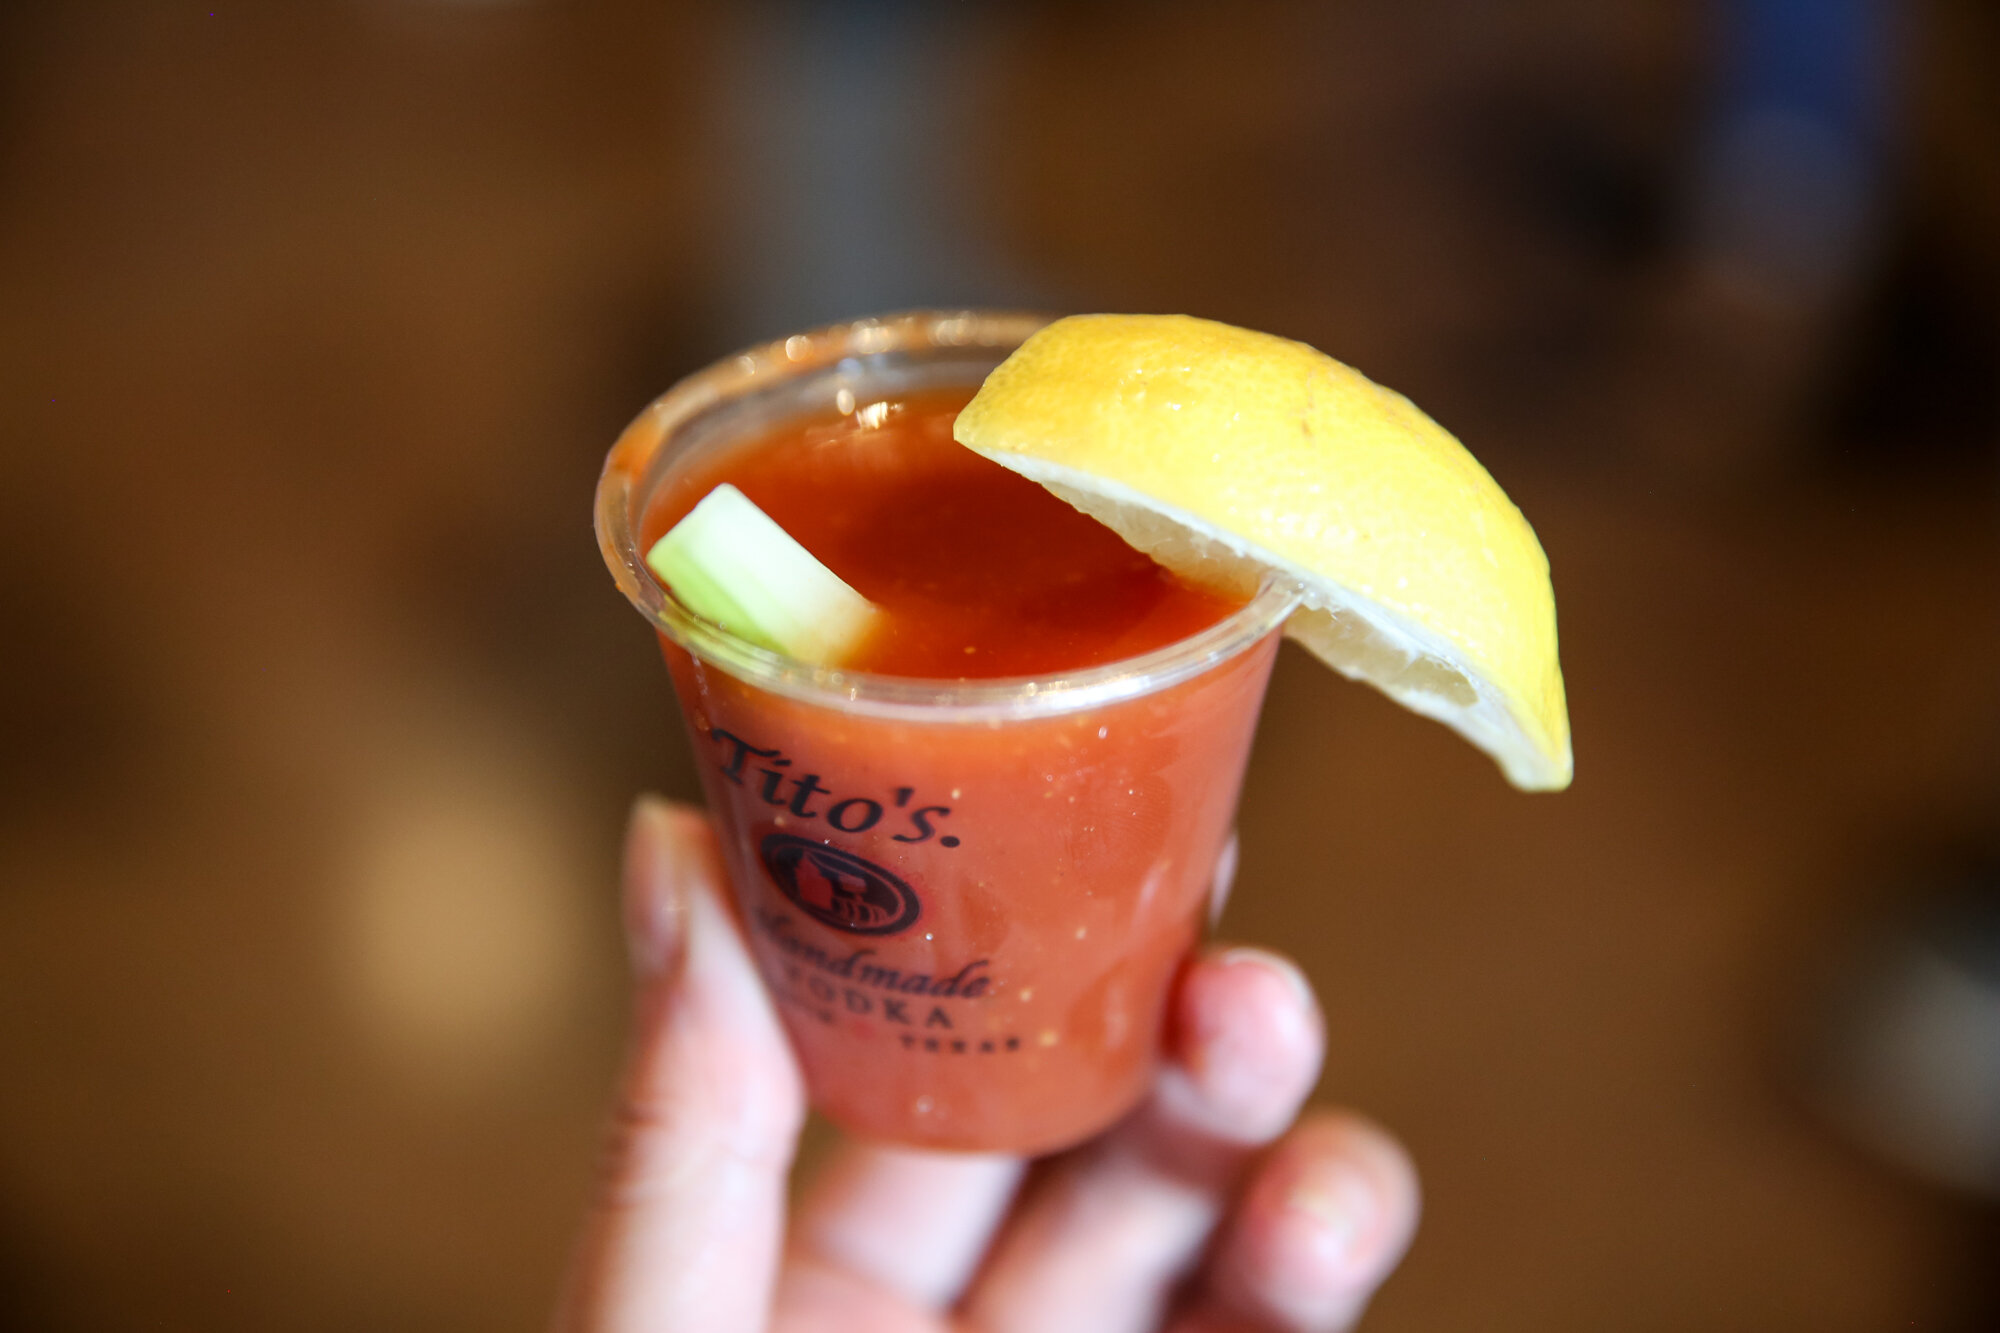 Chicago Bloody Mary, Maddon's 9537.jpg